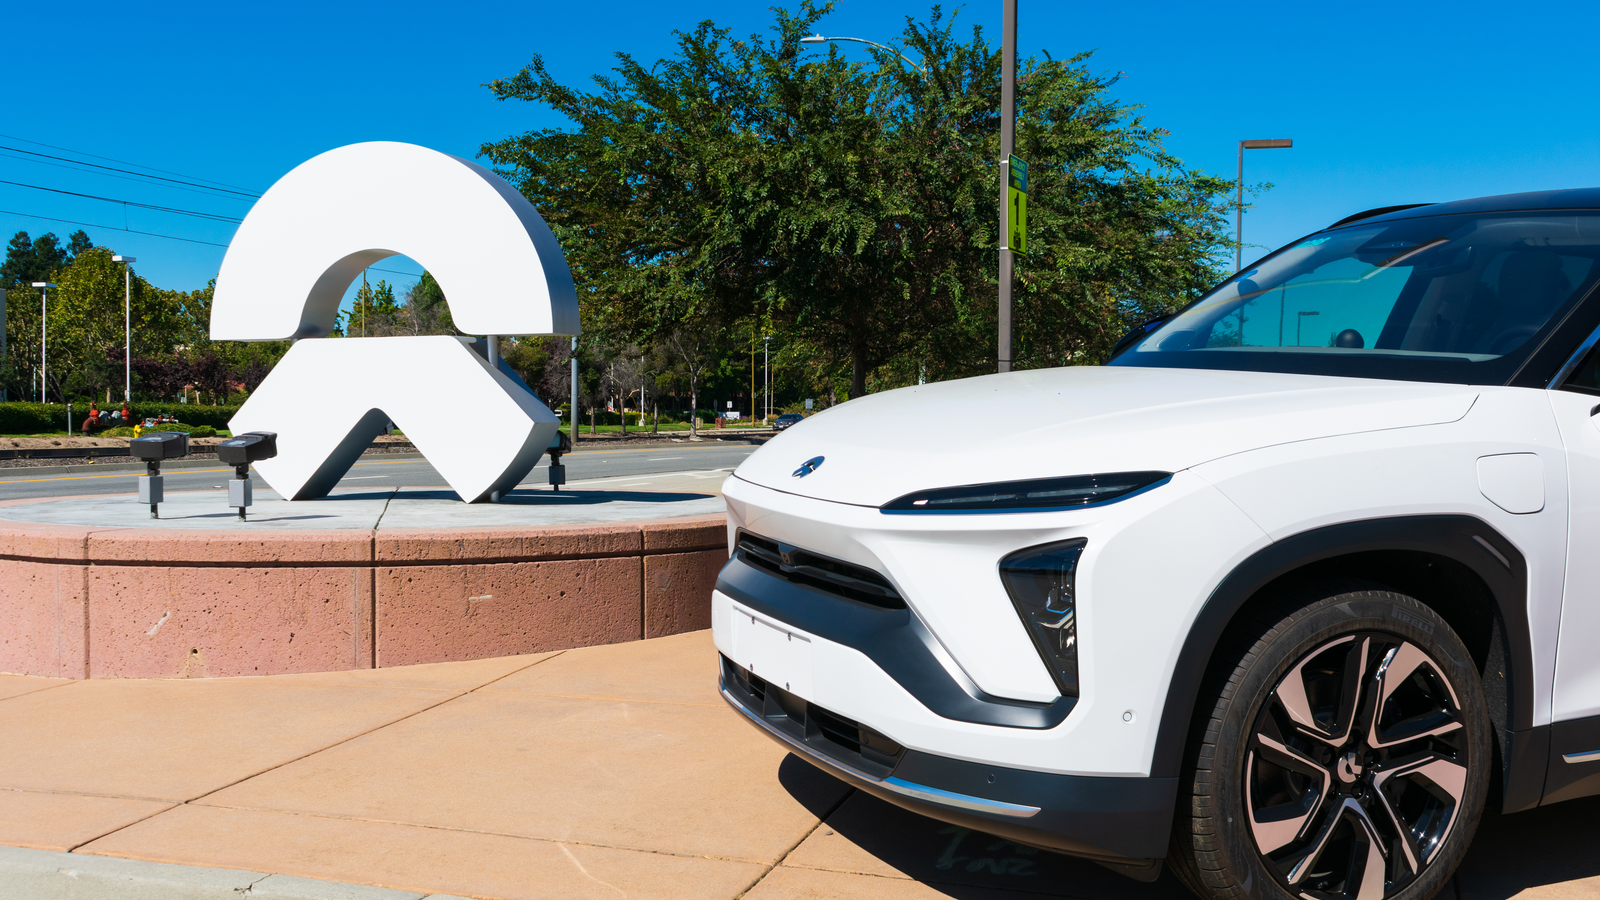 NIO ES6 electric SUV semi-autonomous car on display near Chinese automobile manufacturer NIO software development office in Silicon Valley. Chinese EV companies like NIO are in the news.